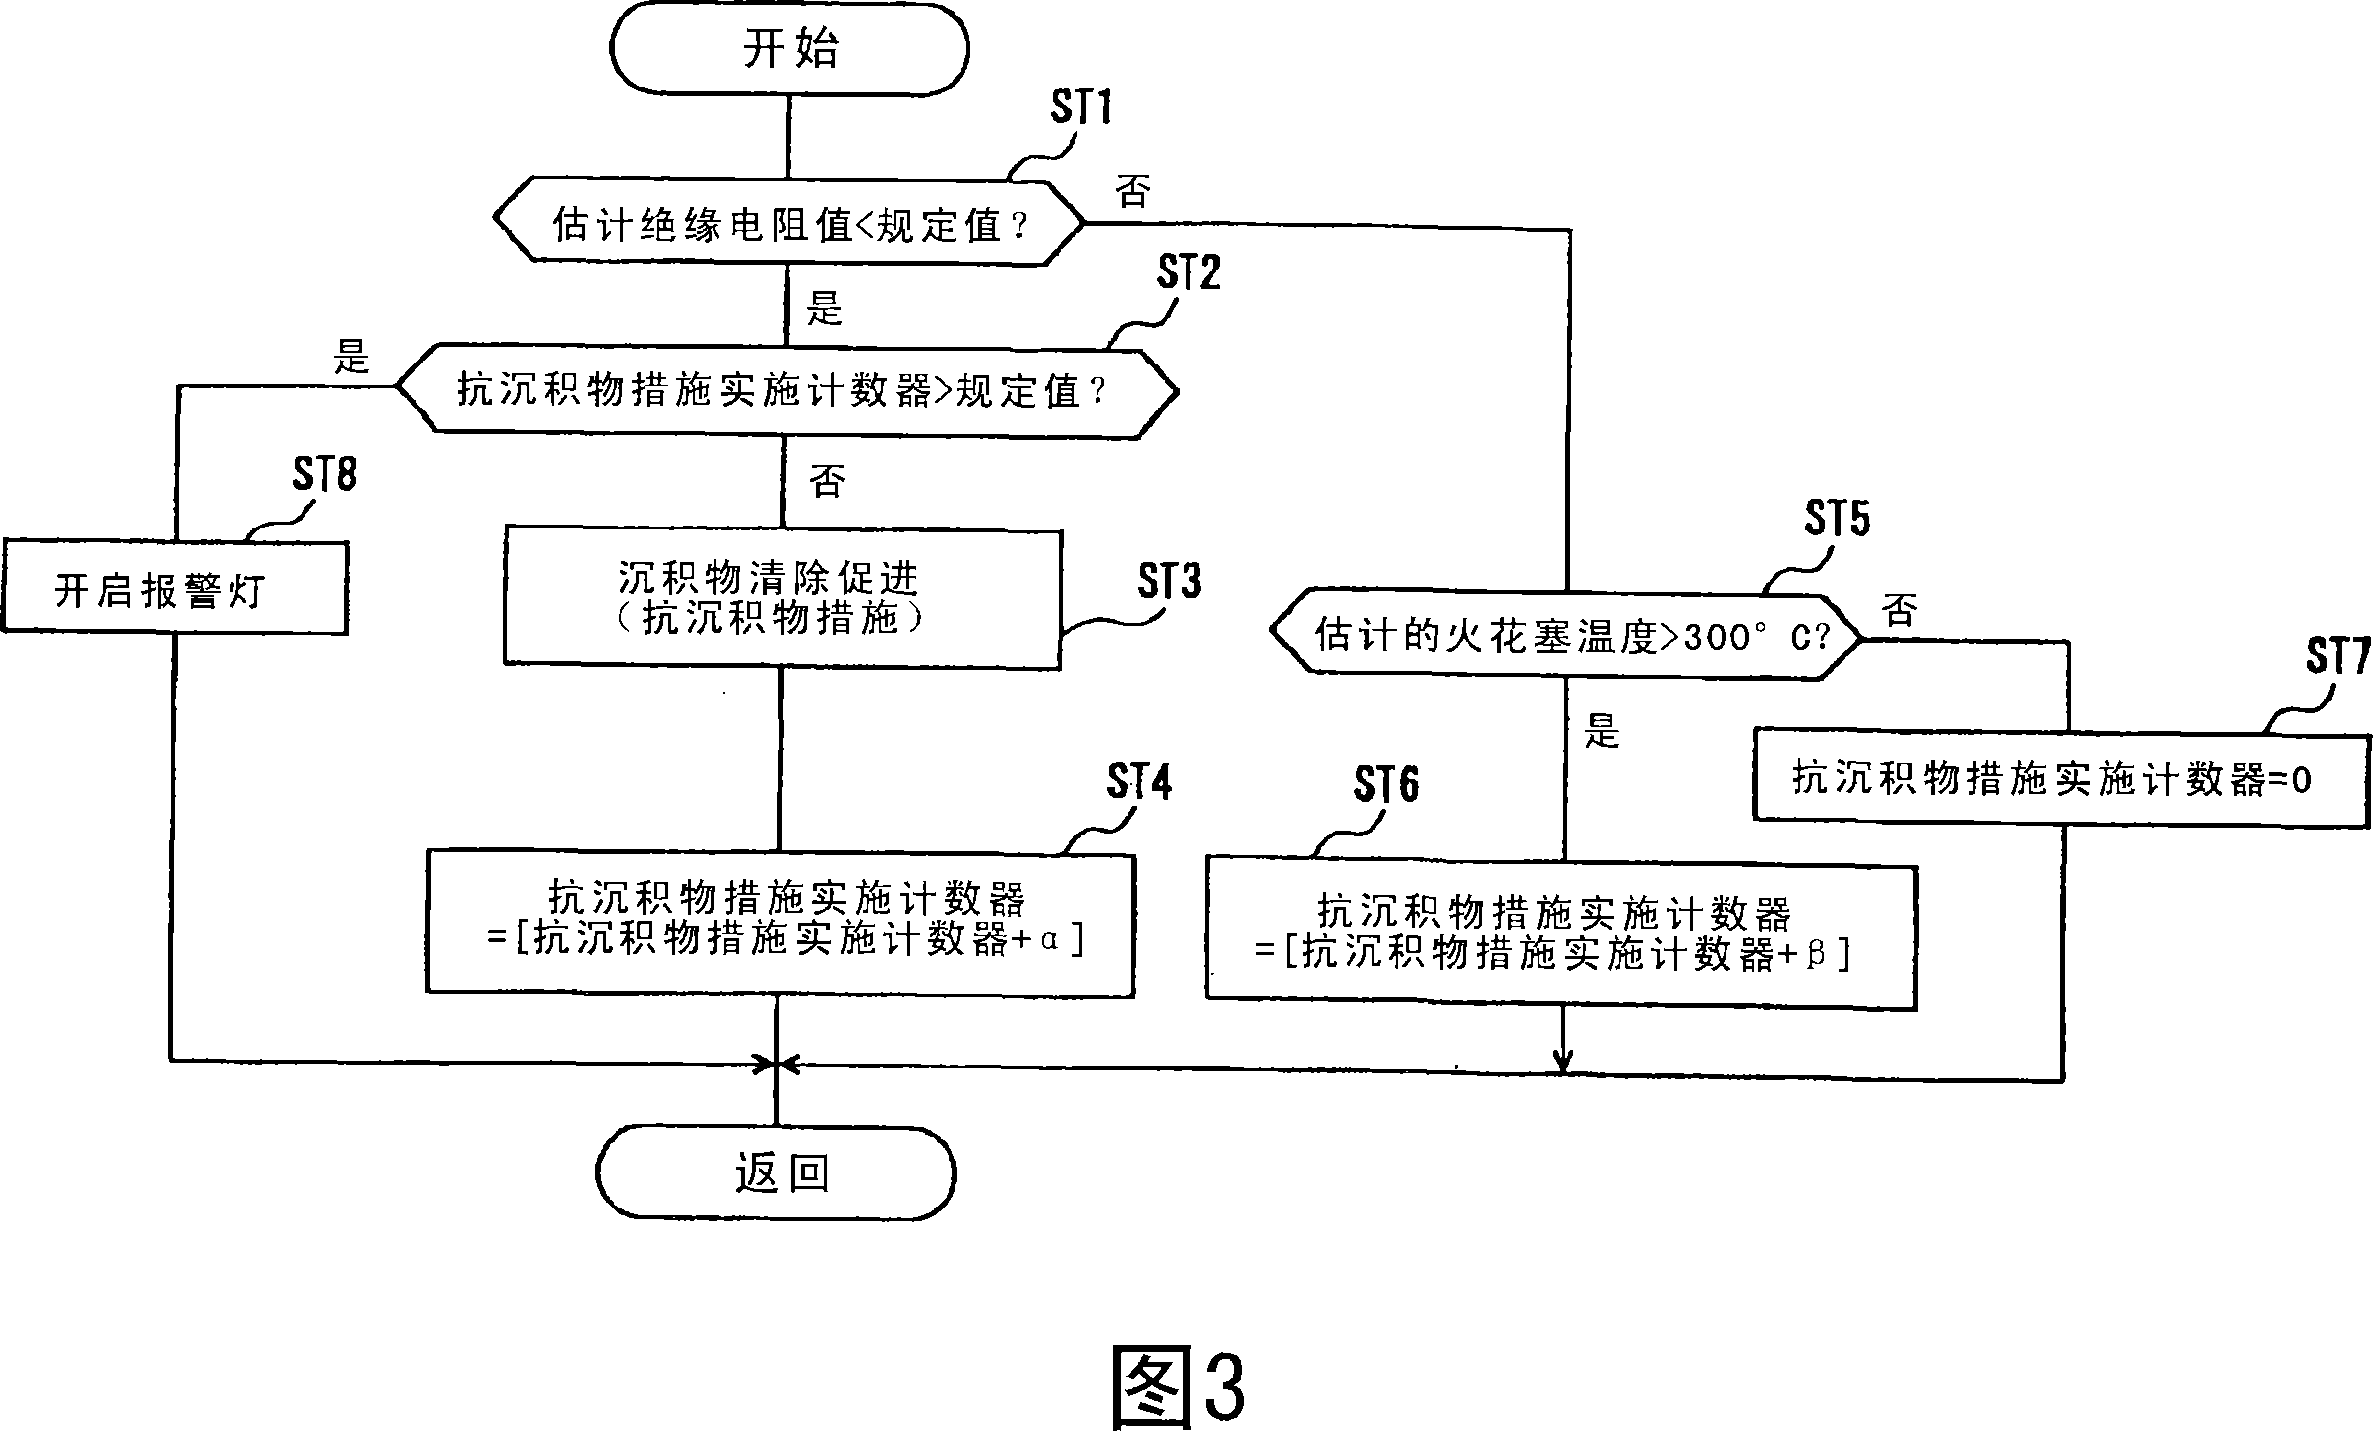 Internal combustion ignition device